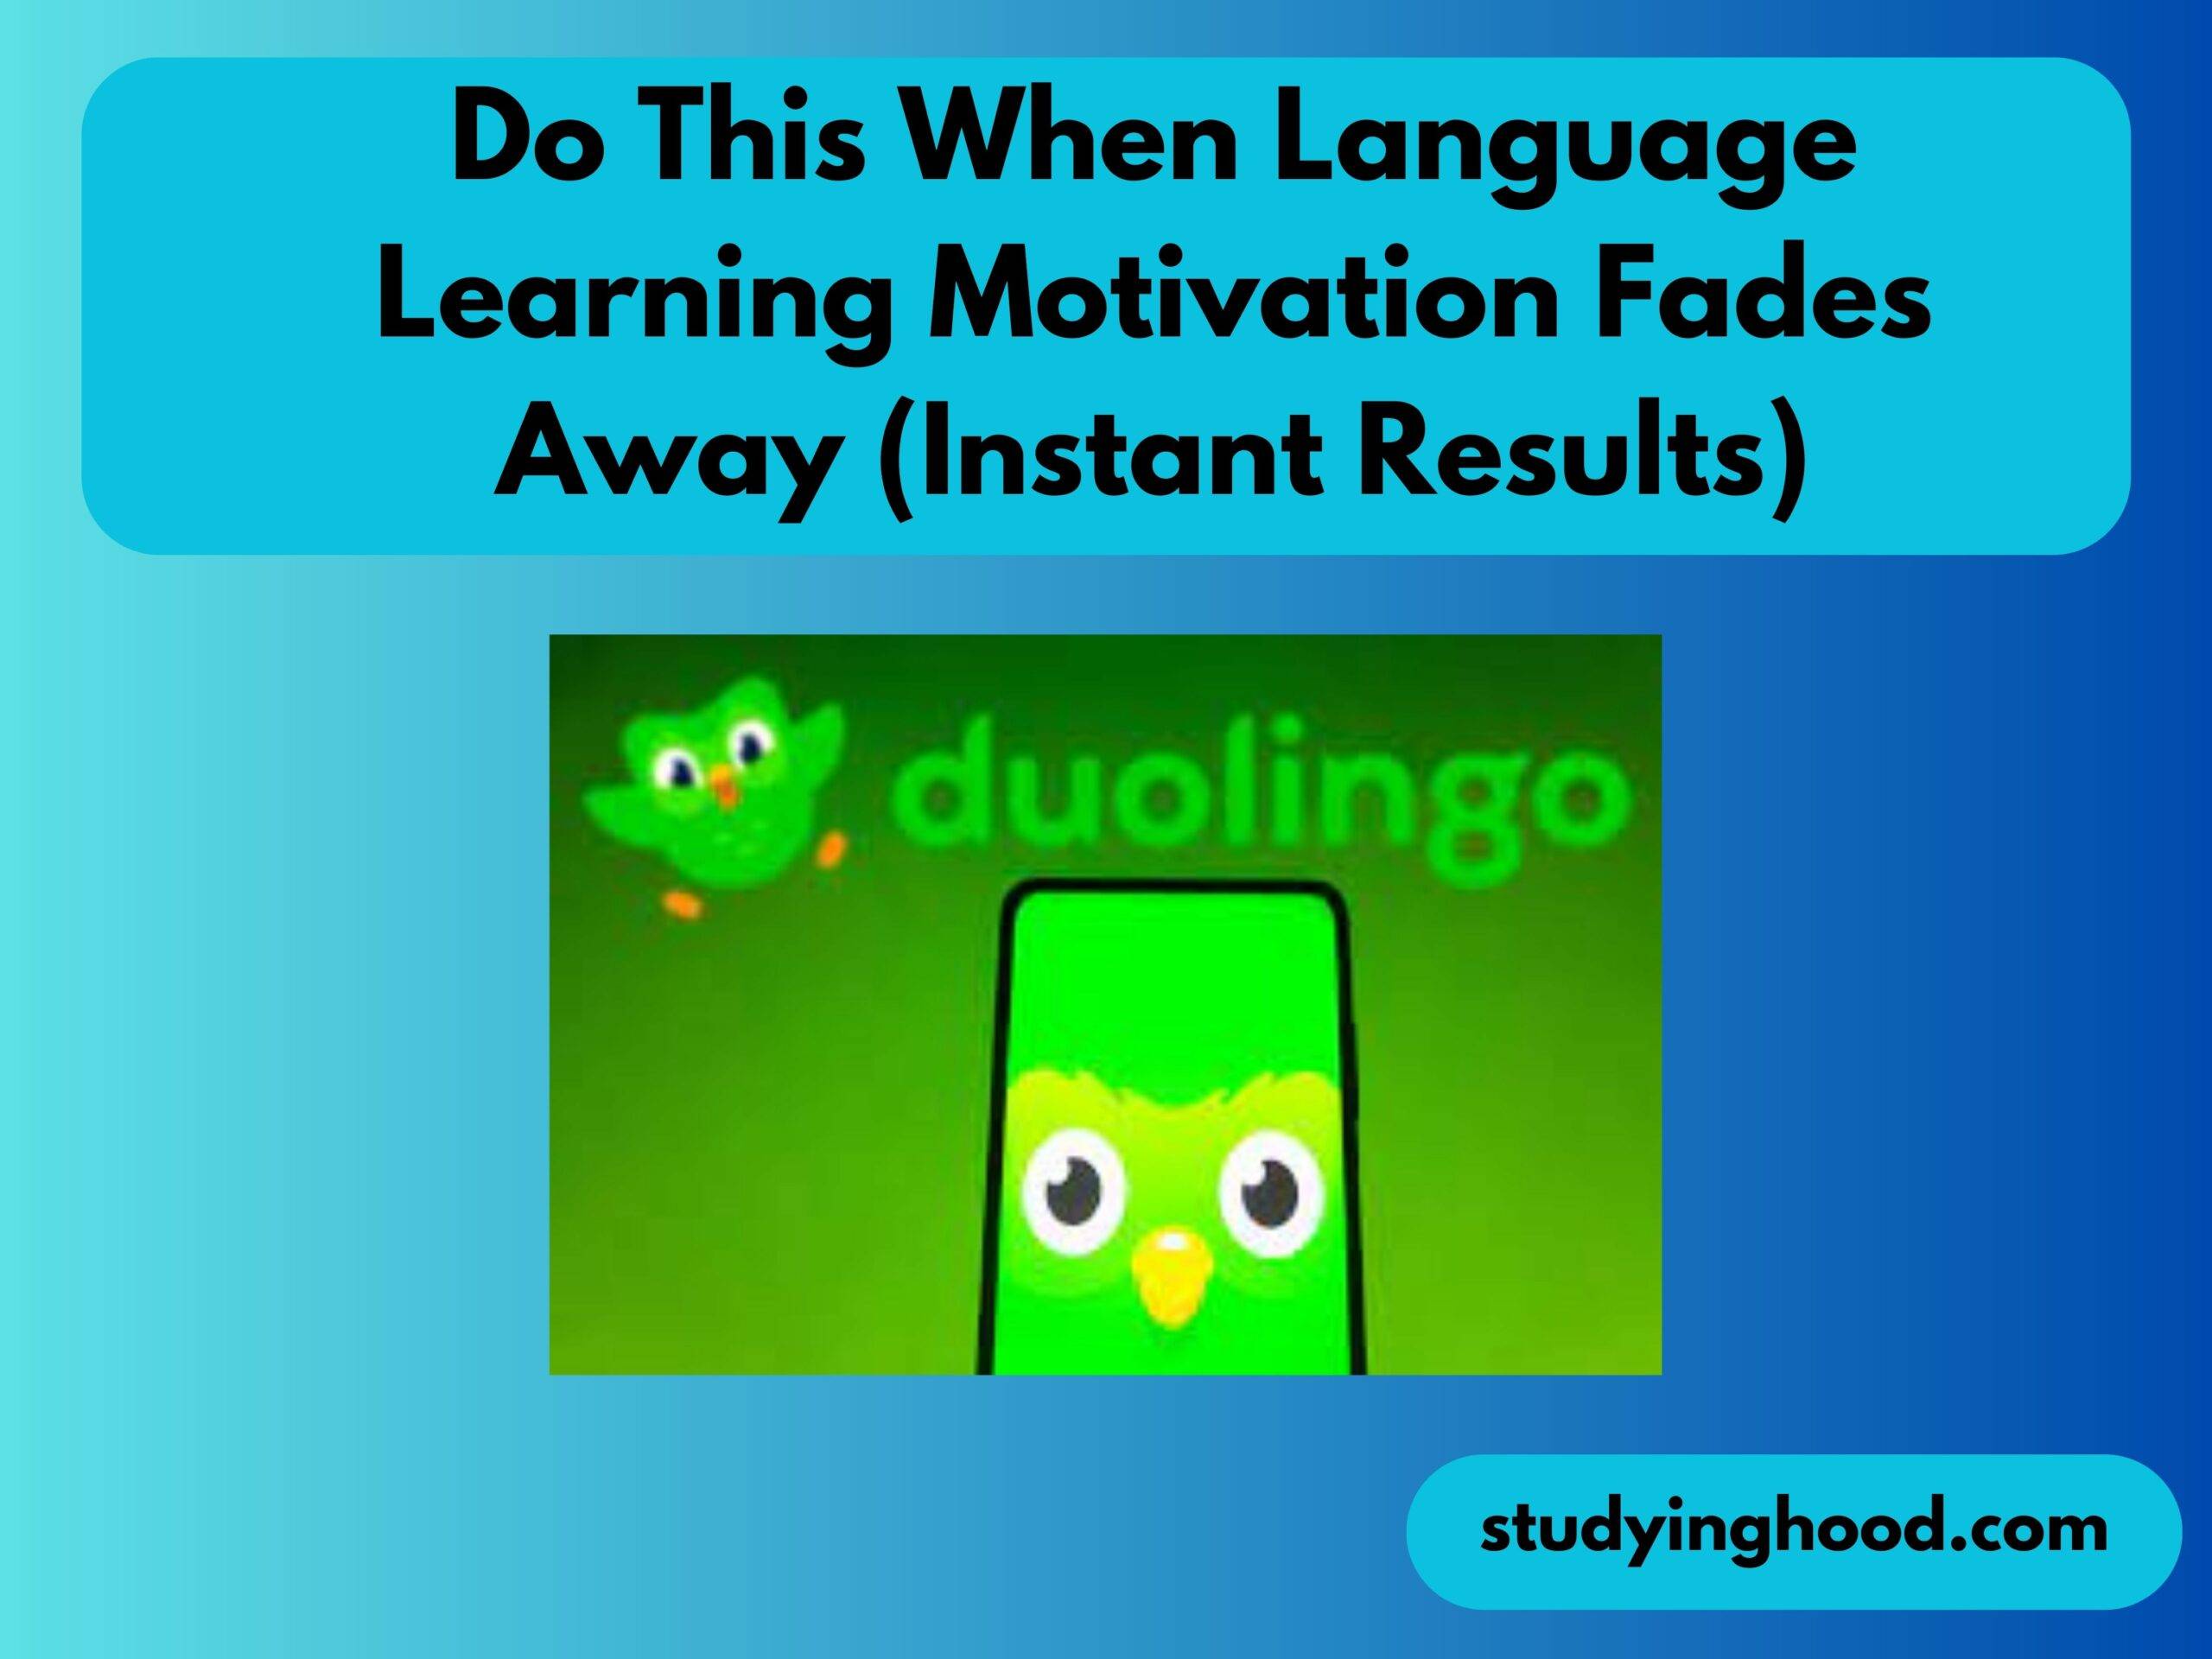 Do This When Language Learning Motivation Fades Away (Instant Results)